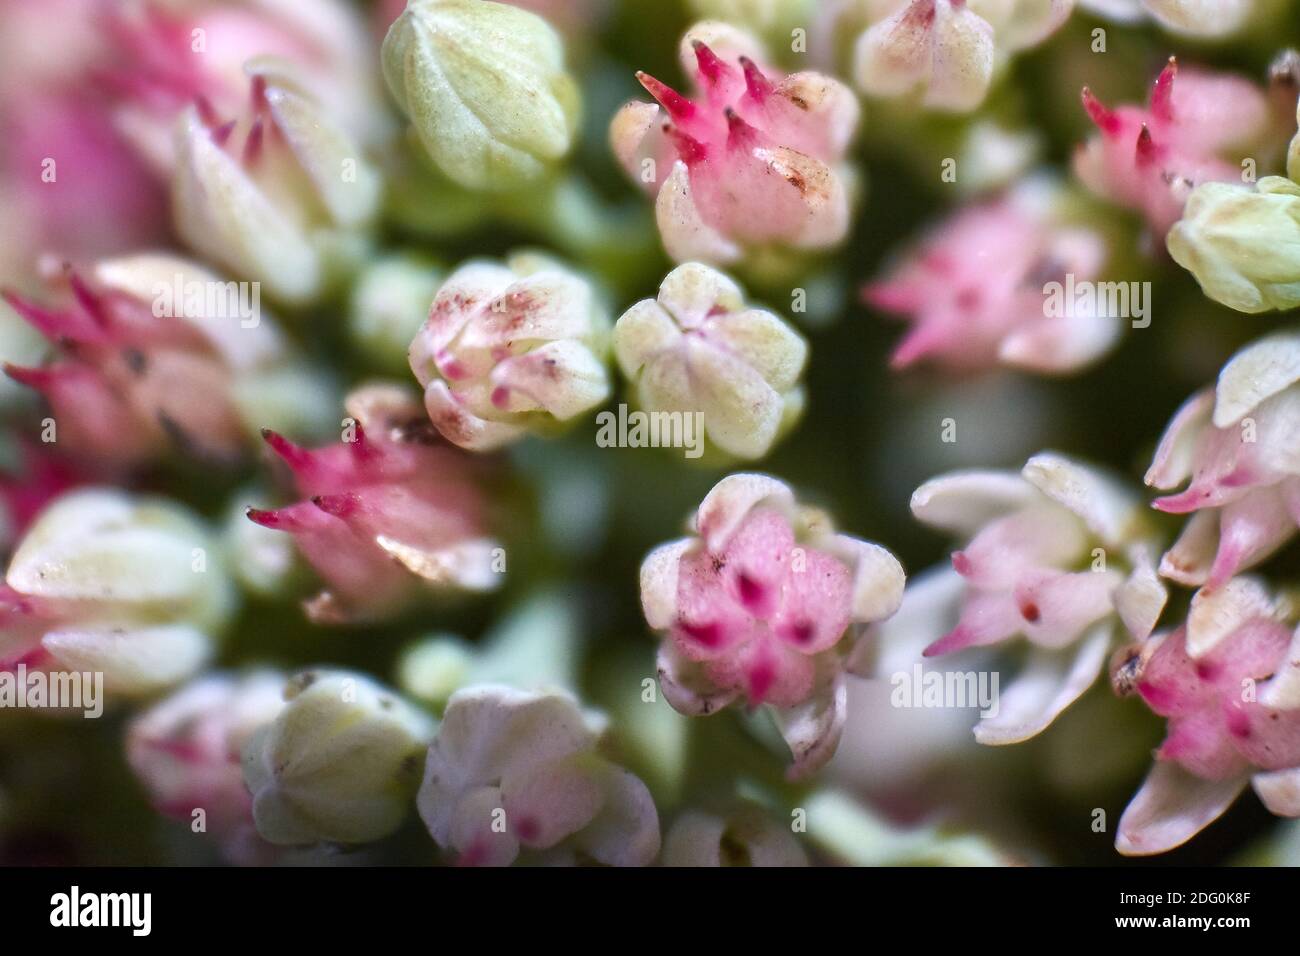 abstract image of a magnified flower Sedum spectabile Boreau Stock Photo